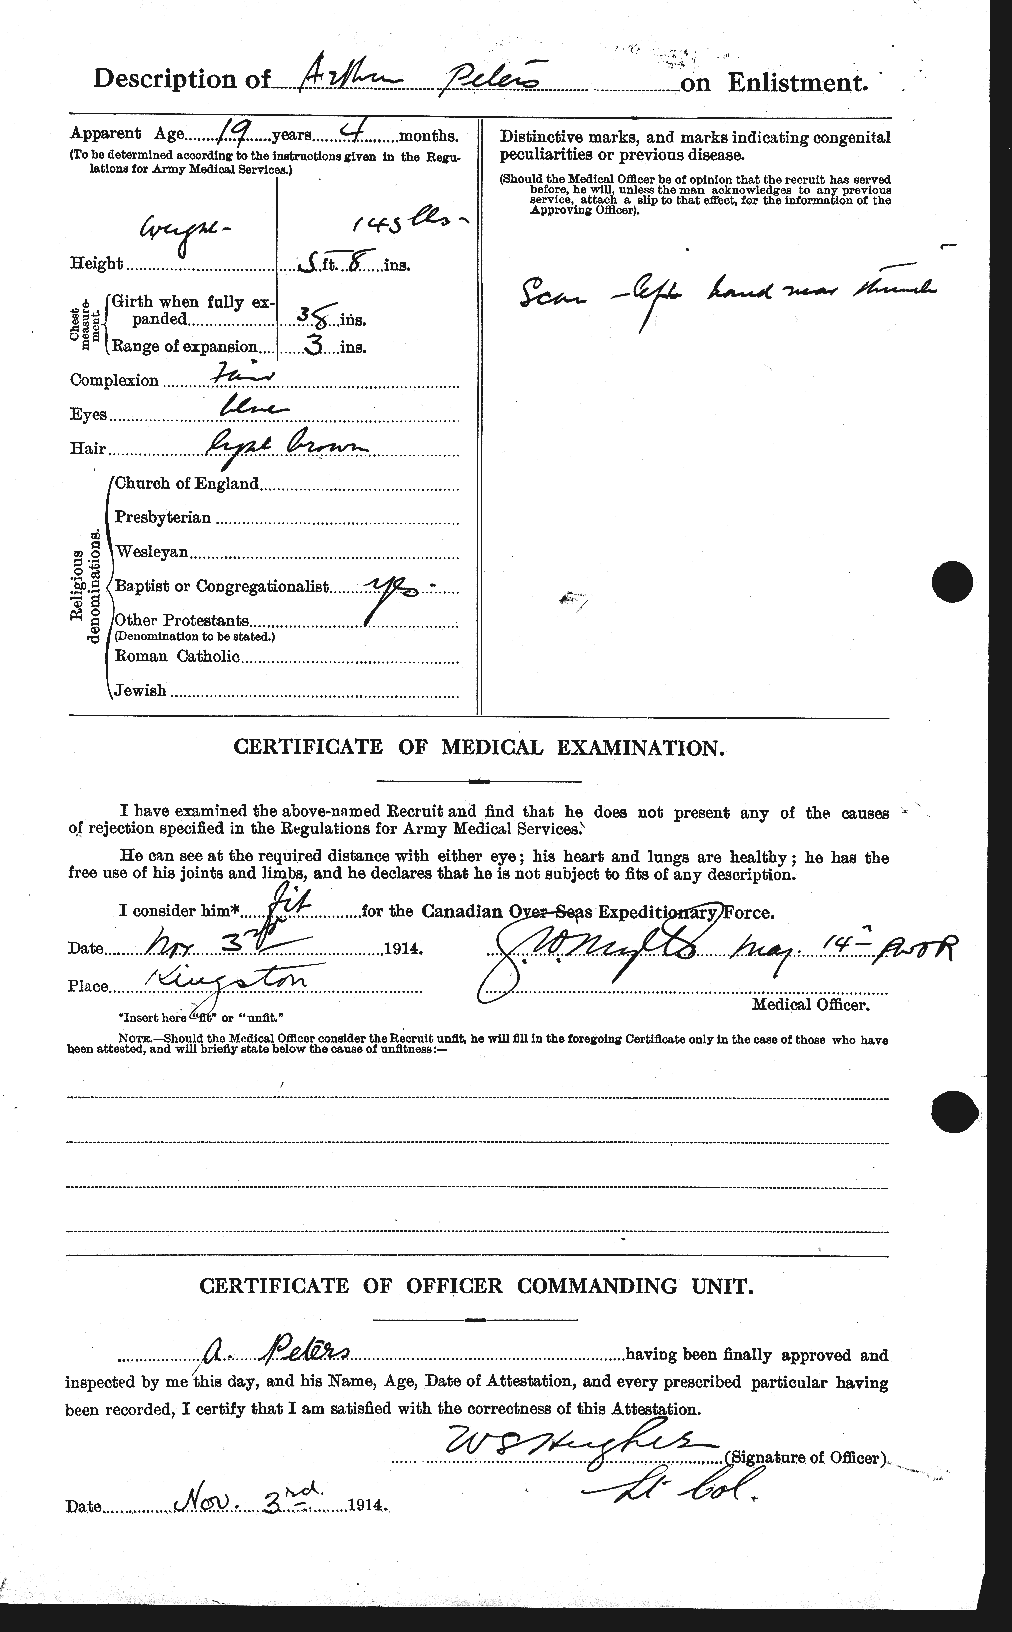 Personnel Records of the First World War - CEF 575352b